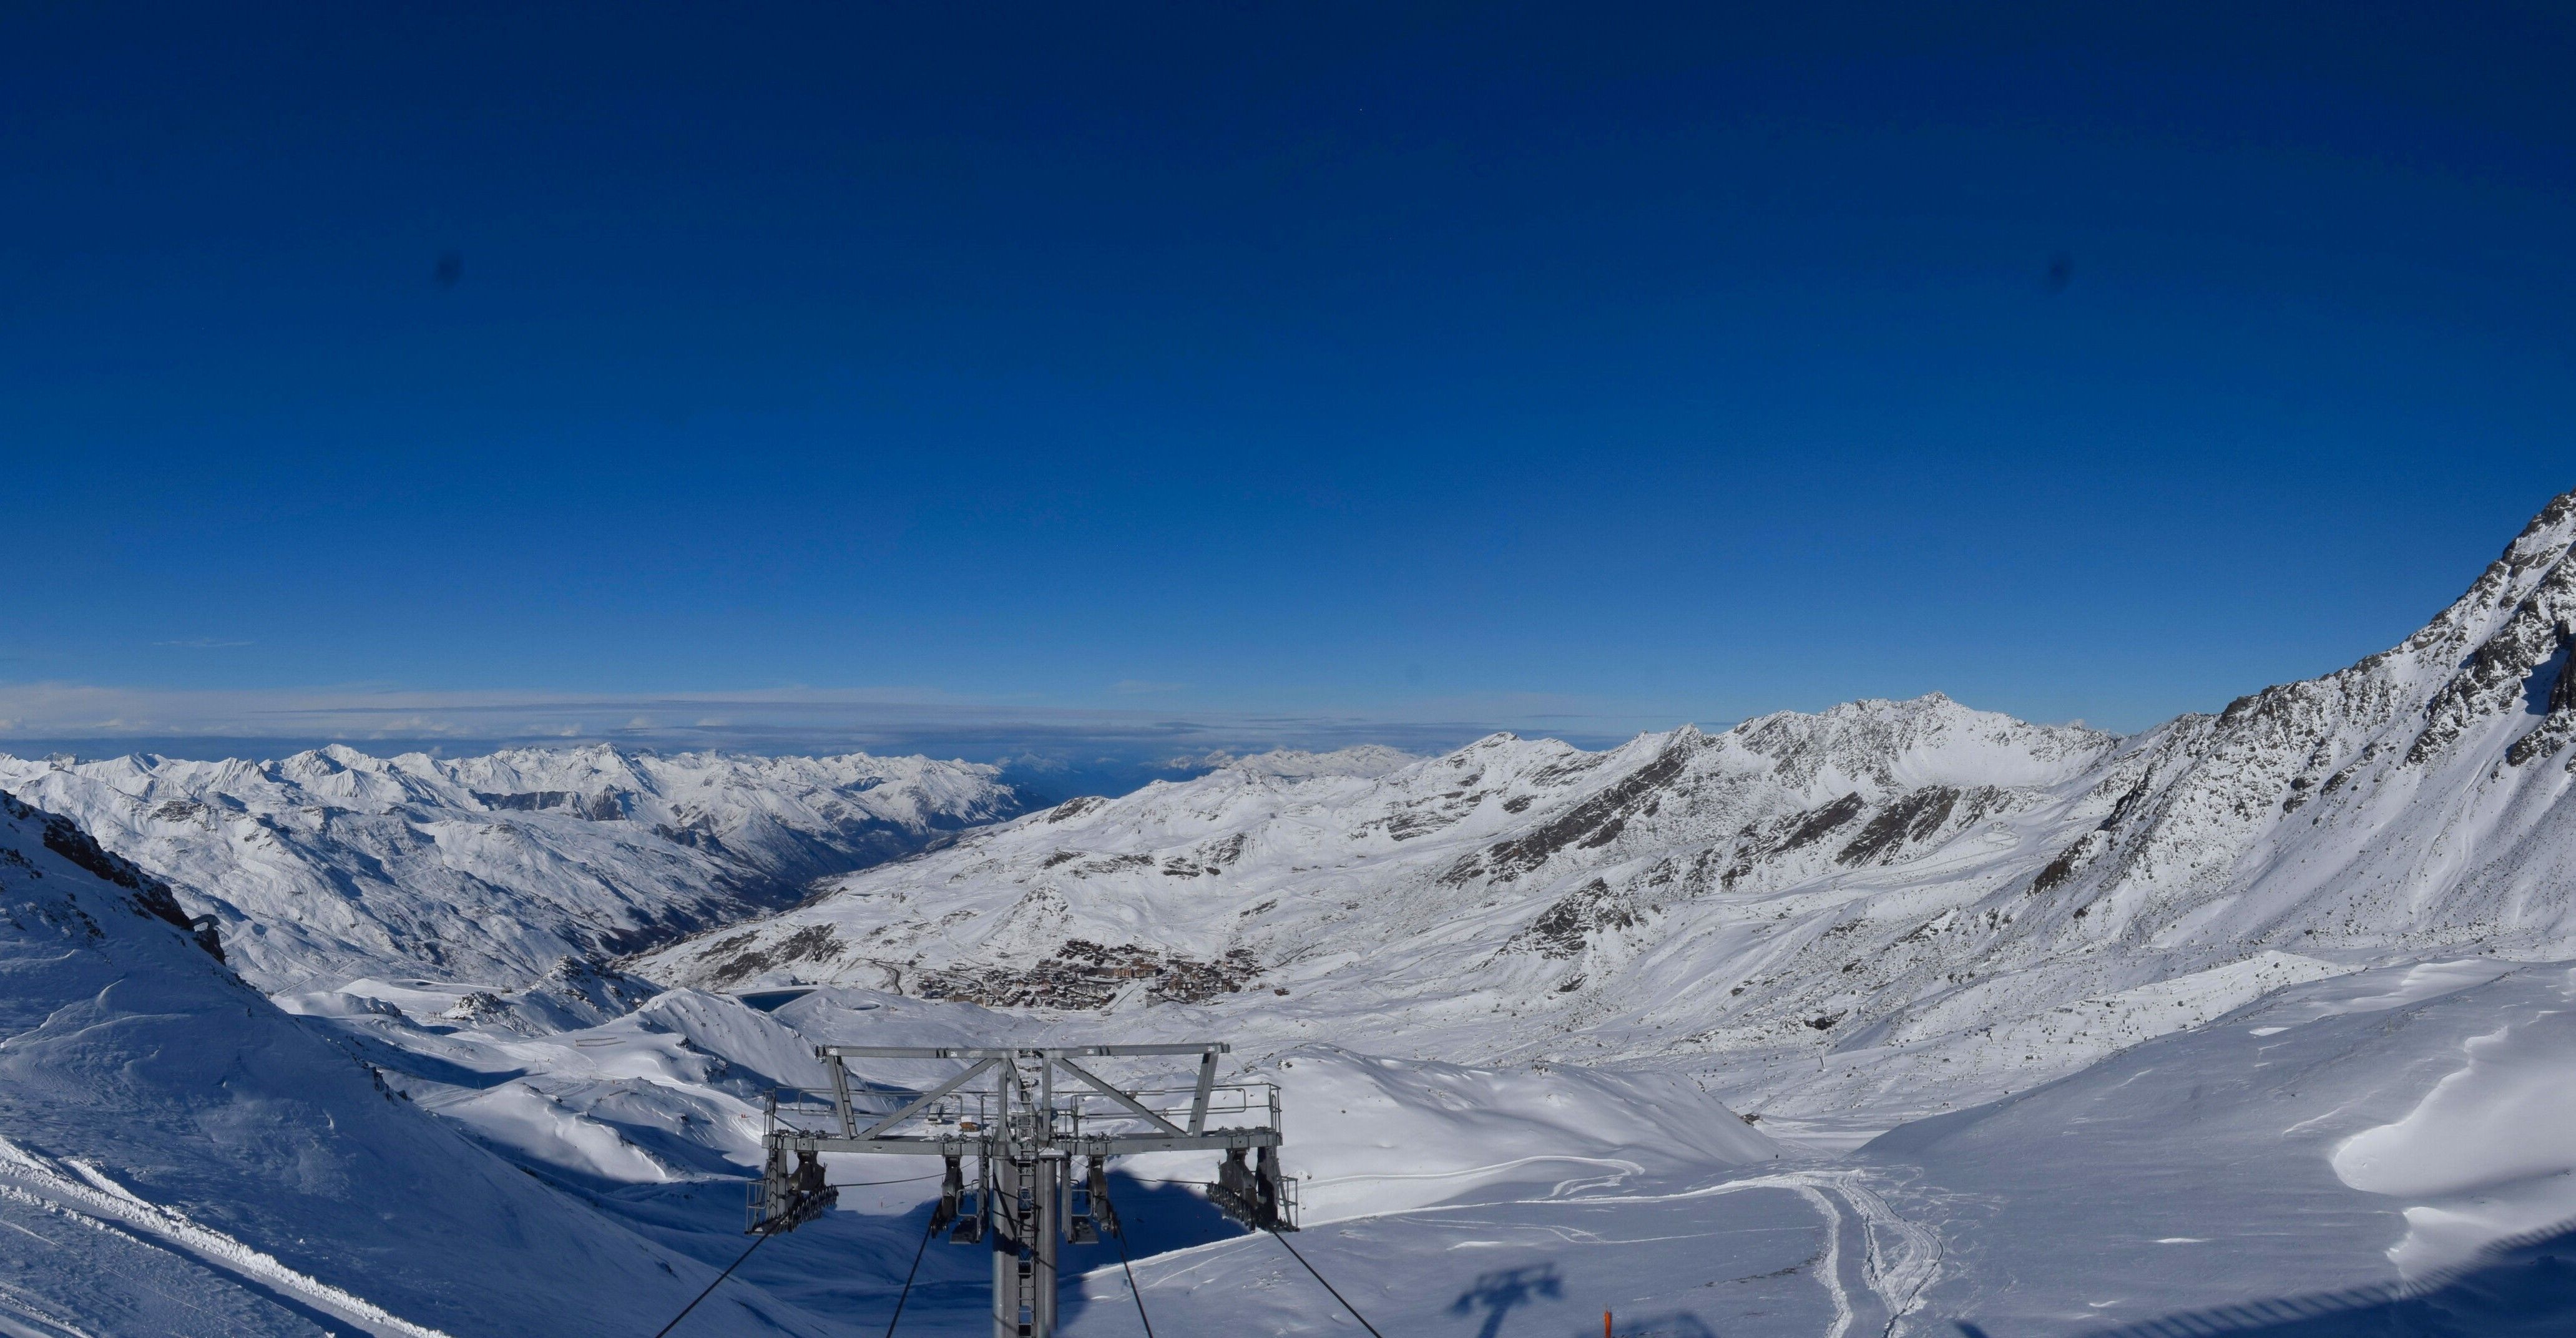 Strongly improved conditions for opening weekend in Val Thorens (skaping.com)